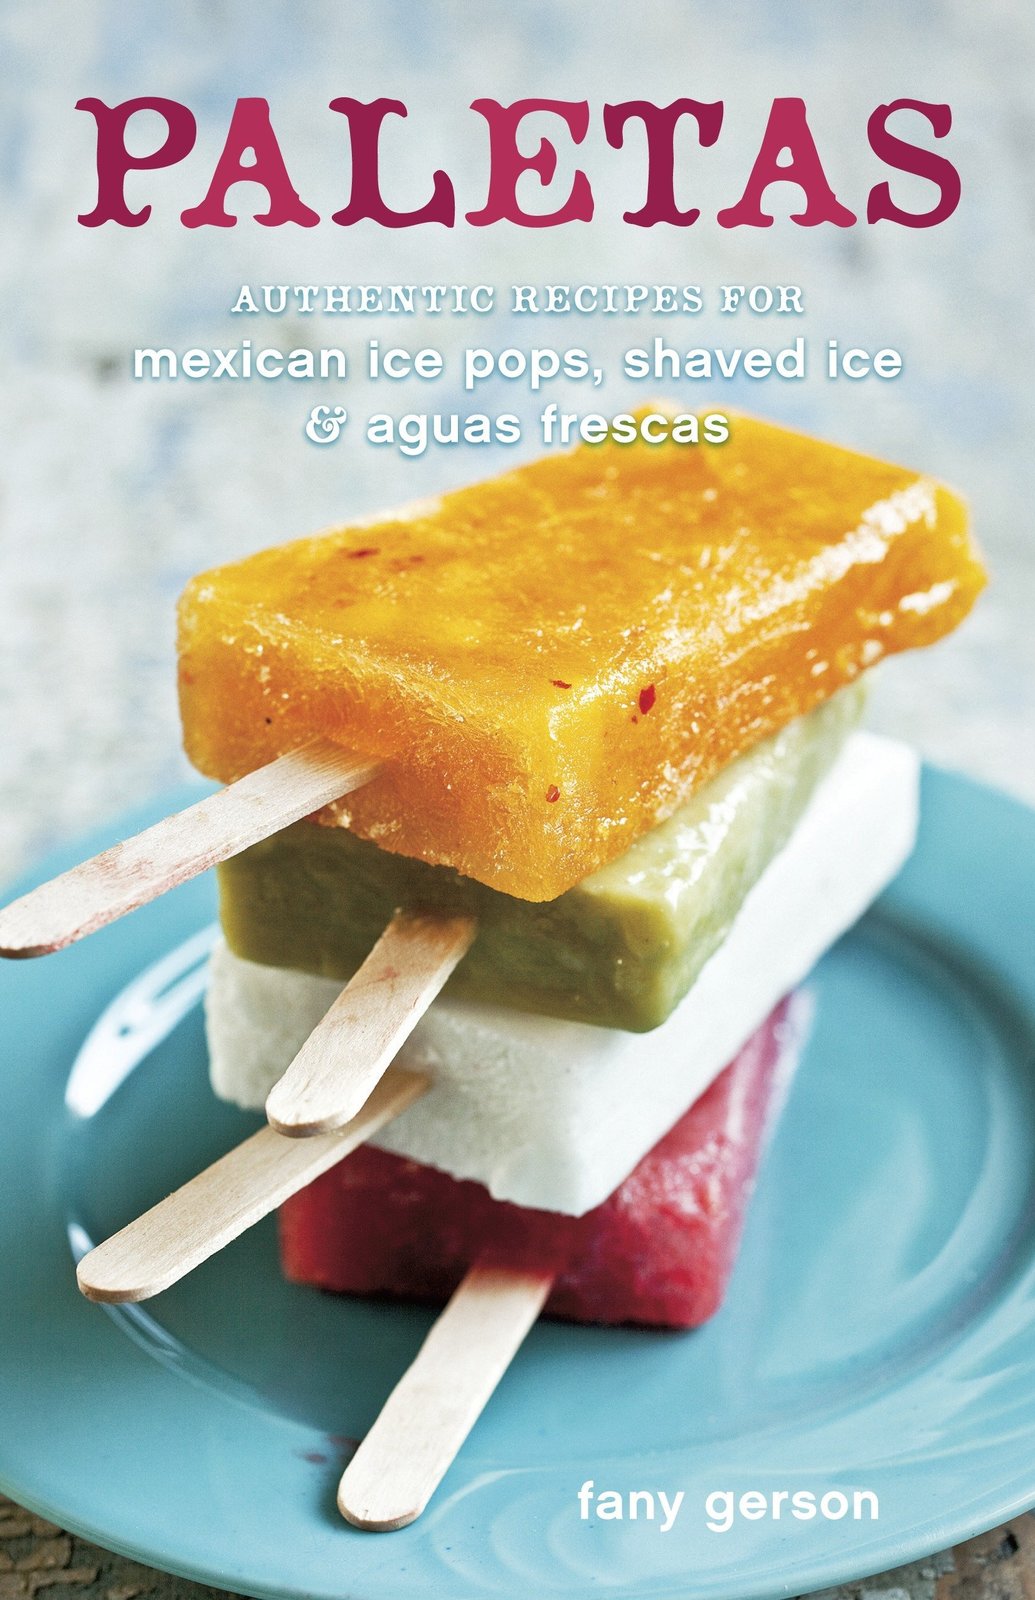 Paletas: Authentic Recipes for Mexican Ice Pops, Shaved Ice & Aguas Frescas [A C - $9.99